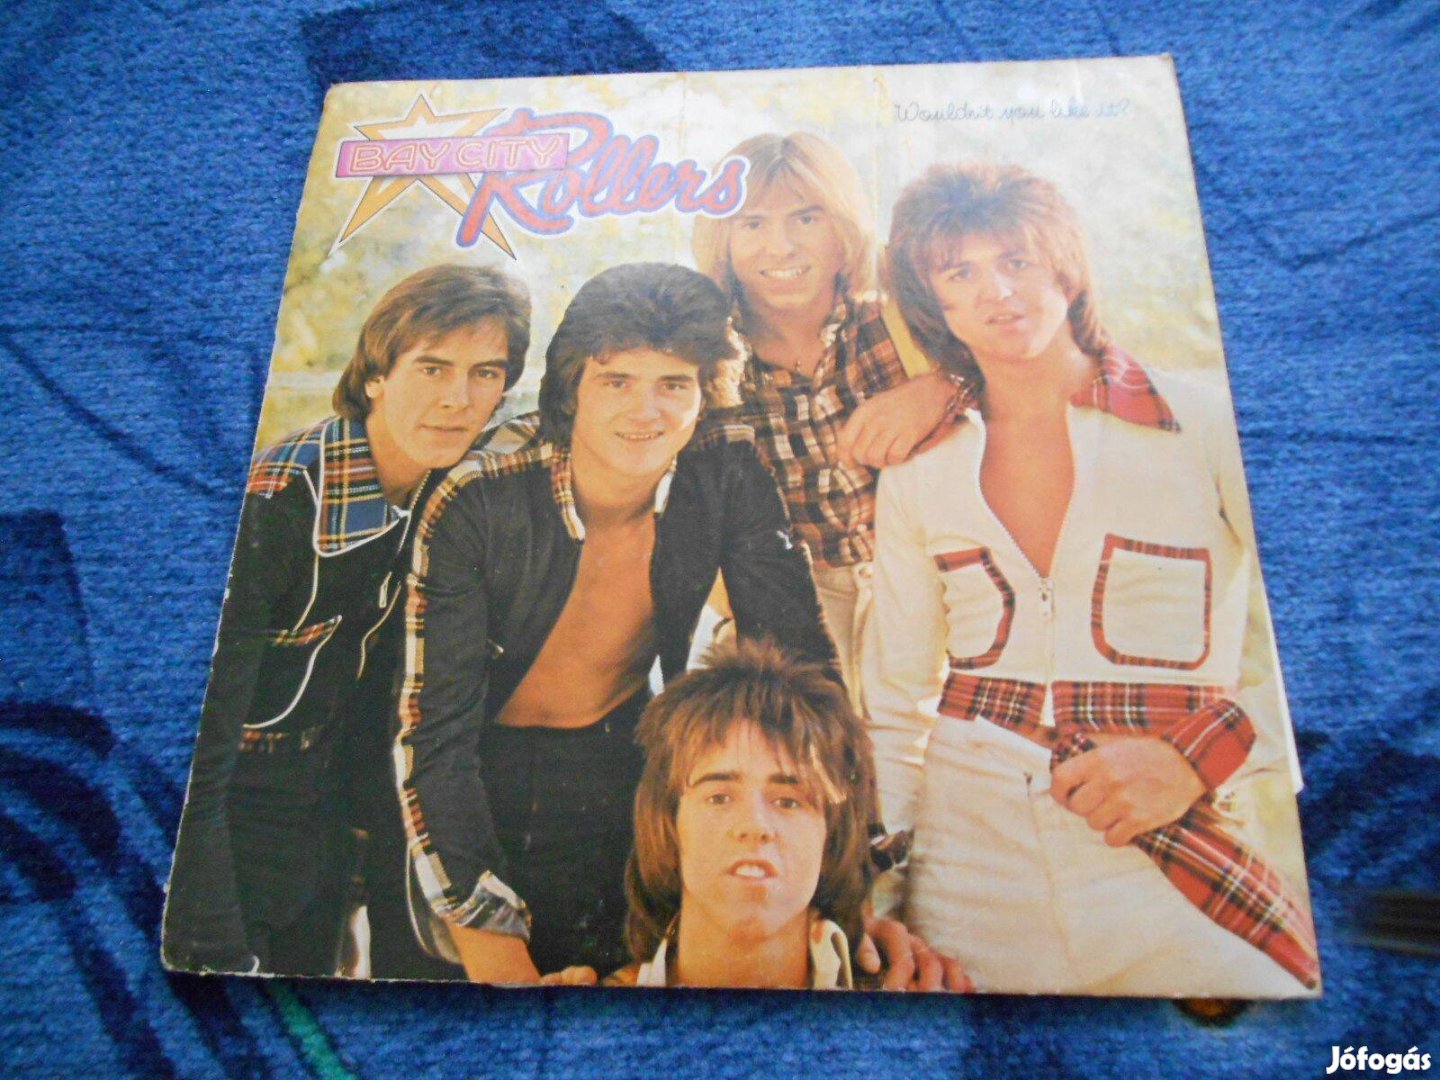 Bay City Rollers Wouldn't You Like It LP